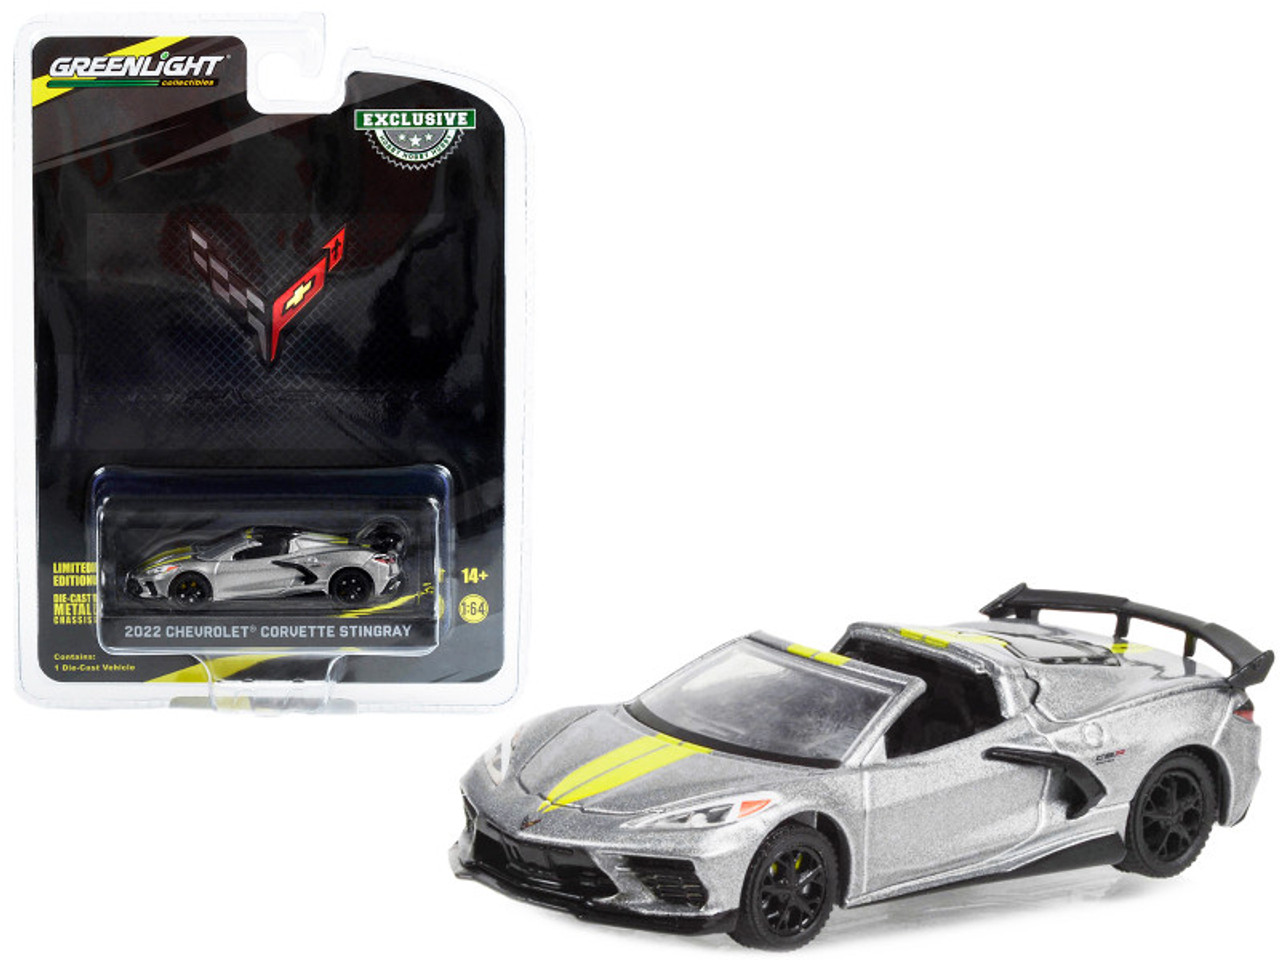 2022 Chevrolet Corvette C8.R Stingray Convertible Hypersonic Gray with Yellow Stripes "2022 IMSA GTLM Championship Edition" "Hobby Exclusive" Series 1/64 Diecast Model Car by Greenlight